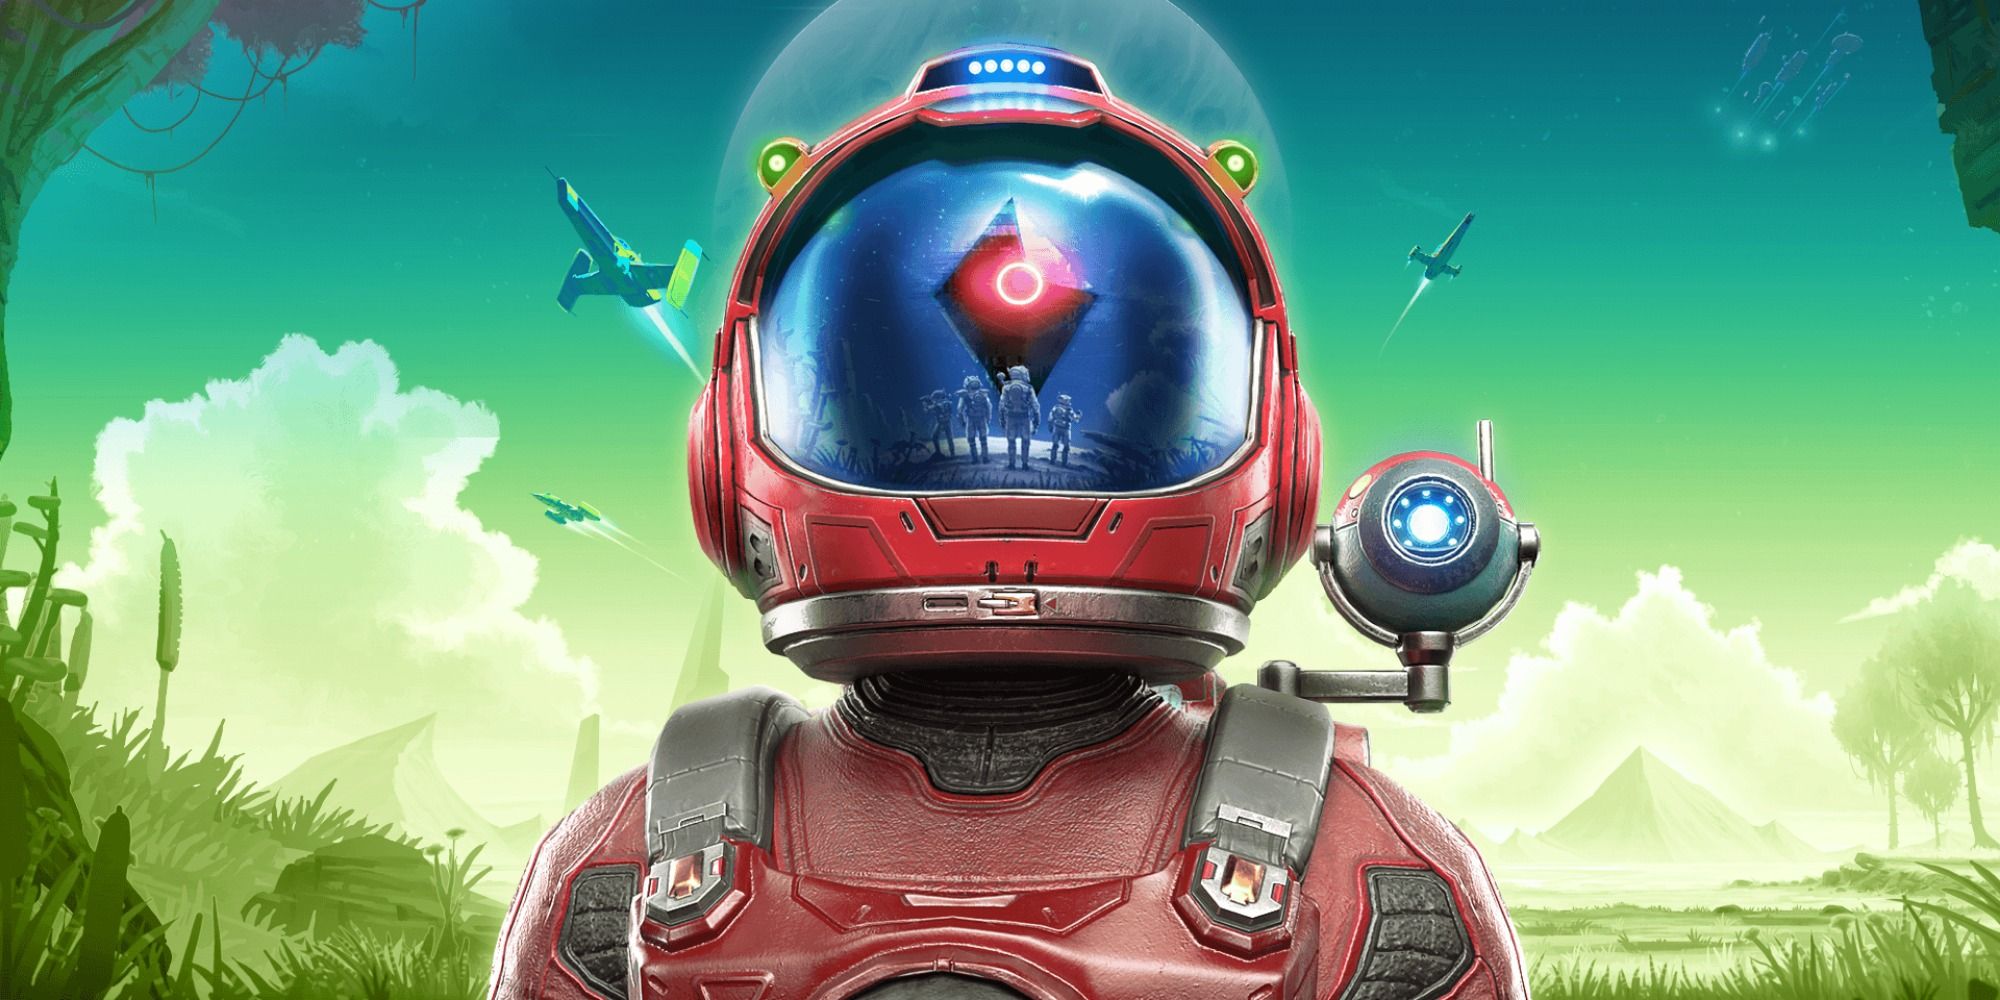 A red astronaut stares into space, his visor reflecting an alien pod and other astronauts